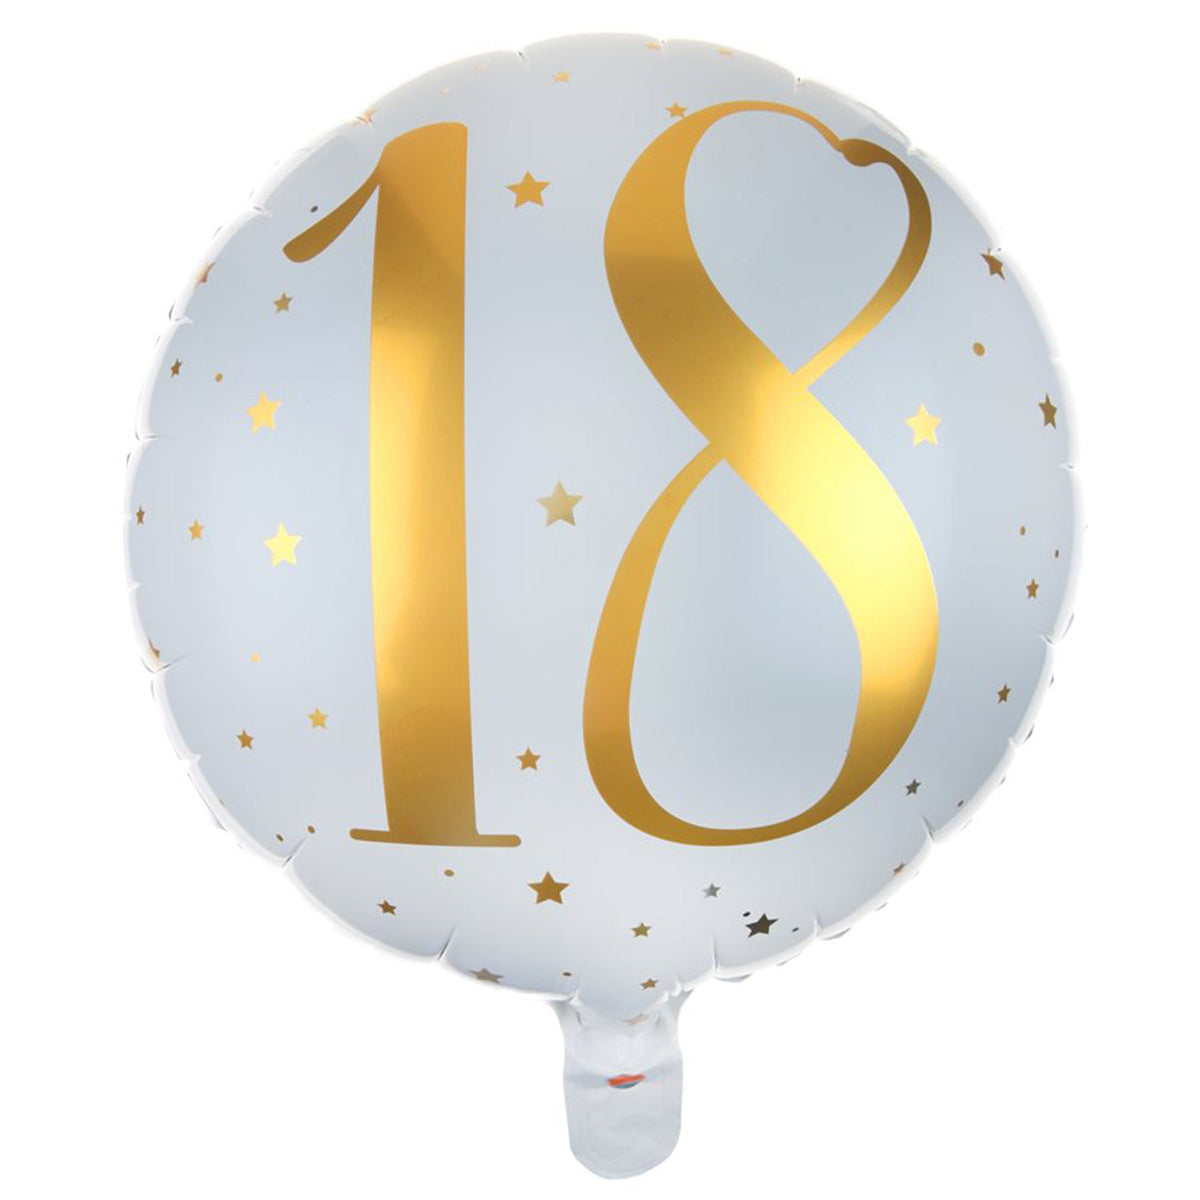 LE GROUPE BLC INTL INC Balloons Gold Trendy Age 18th Birthday Foil Balloon, 18 Inches, 1 Count